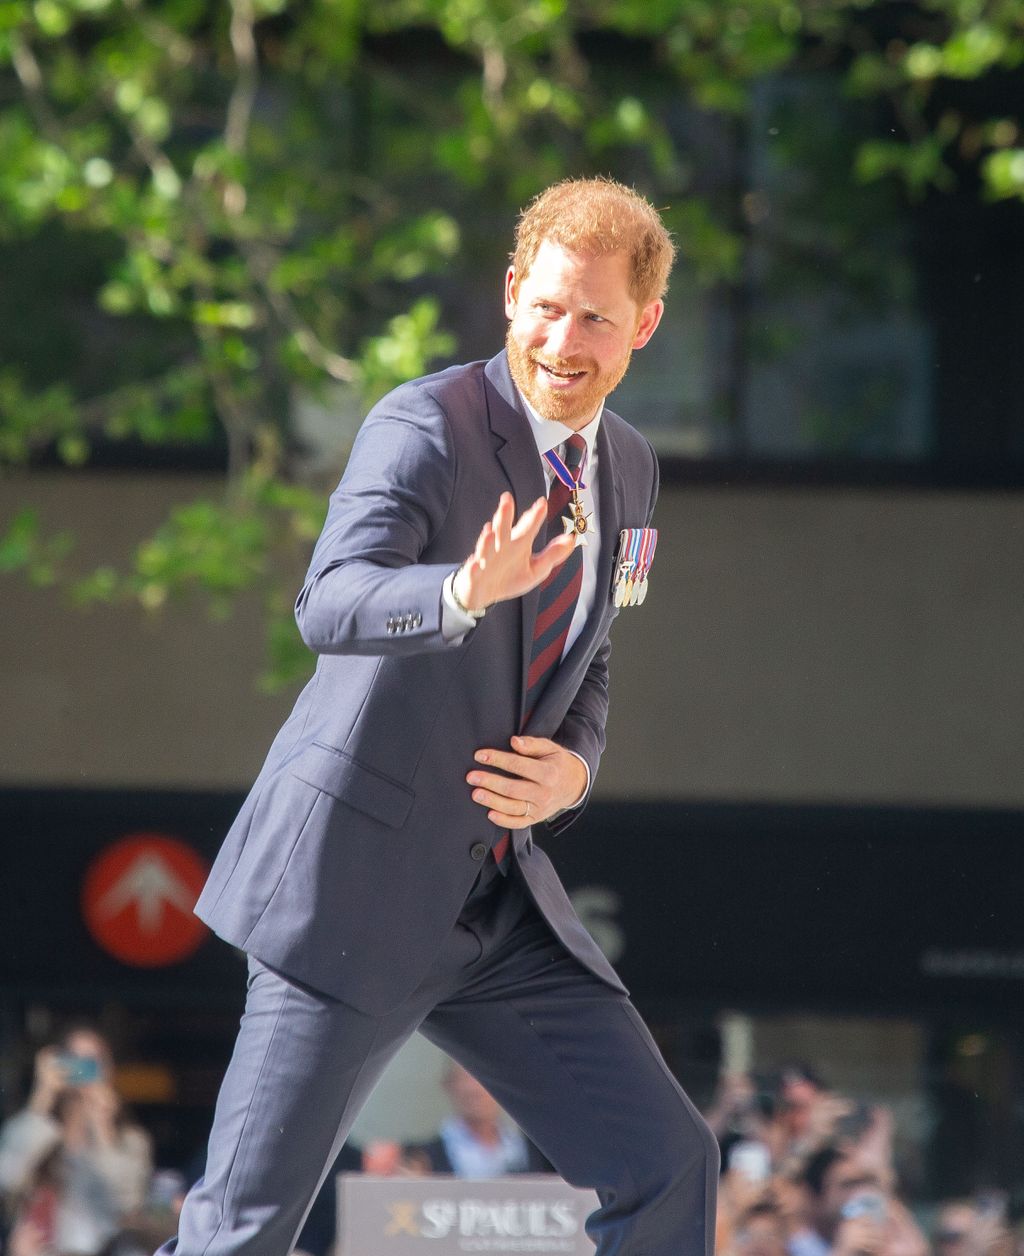 Prince Harry arrives at Invictus Games 10th Anniversary Service in London